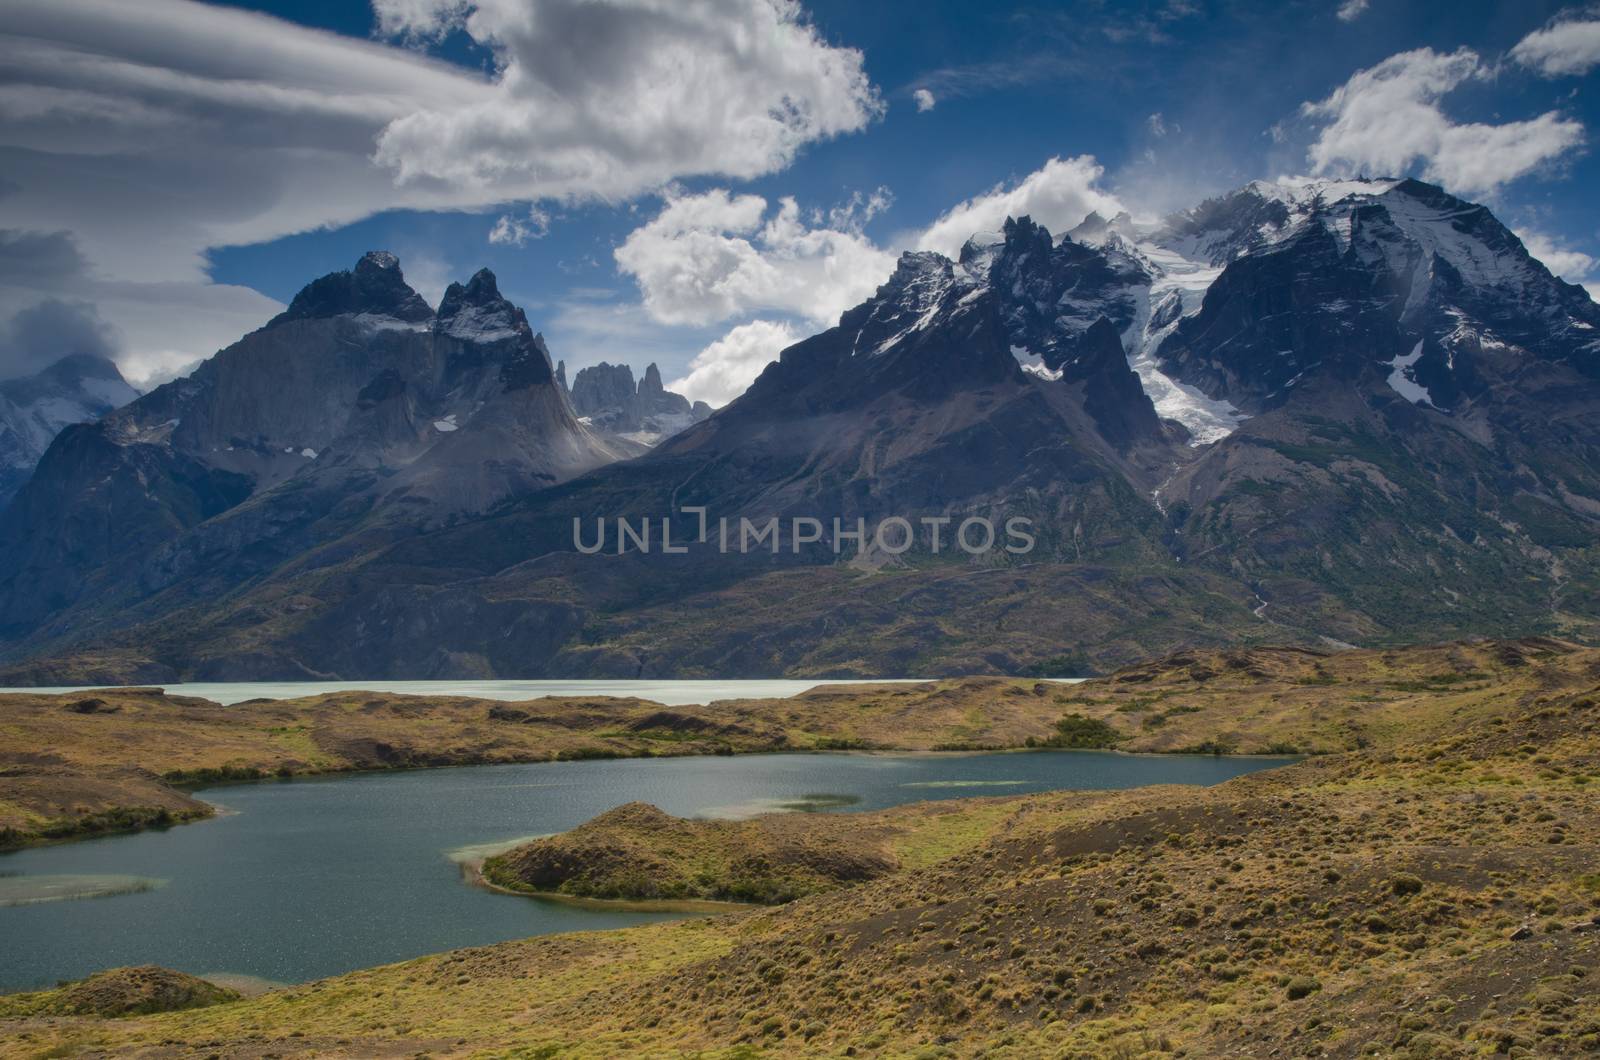 Nordenskjold lake and Cordillera Paine with the Paine Horns in the foreground and the Towers of Paine in the background. Torres del Paine National Park. Magallanes and Chilean Antarctic Region. Chile.